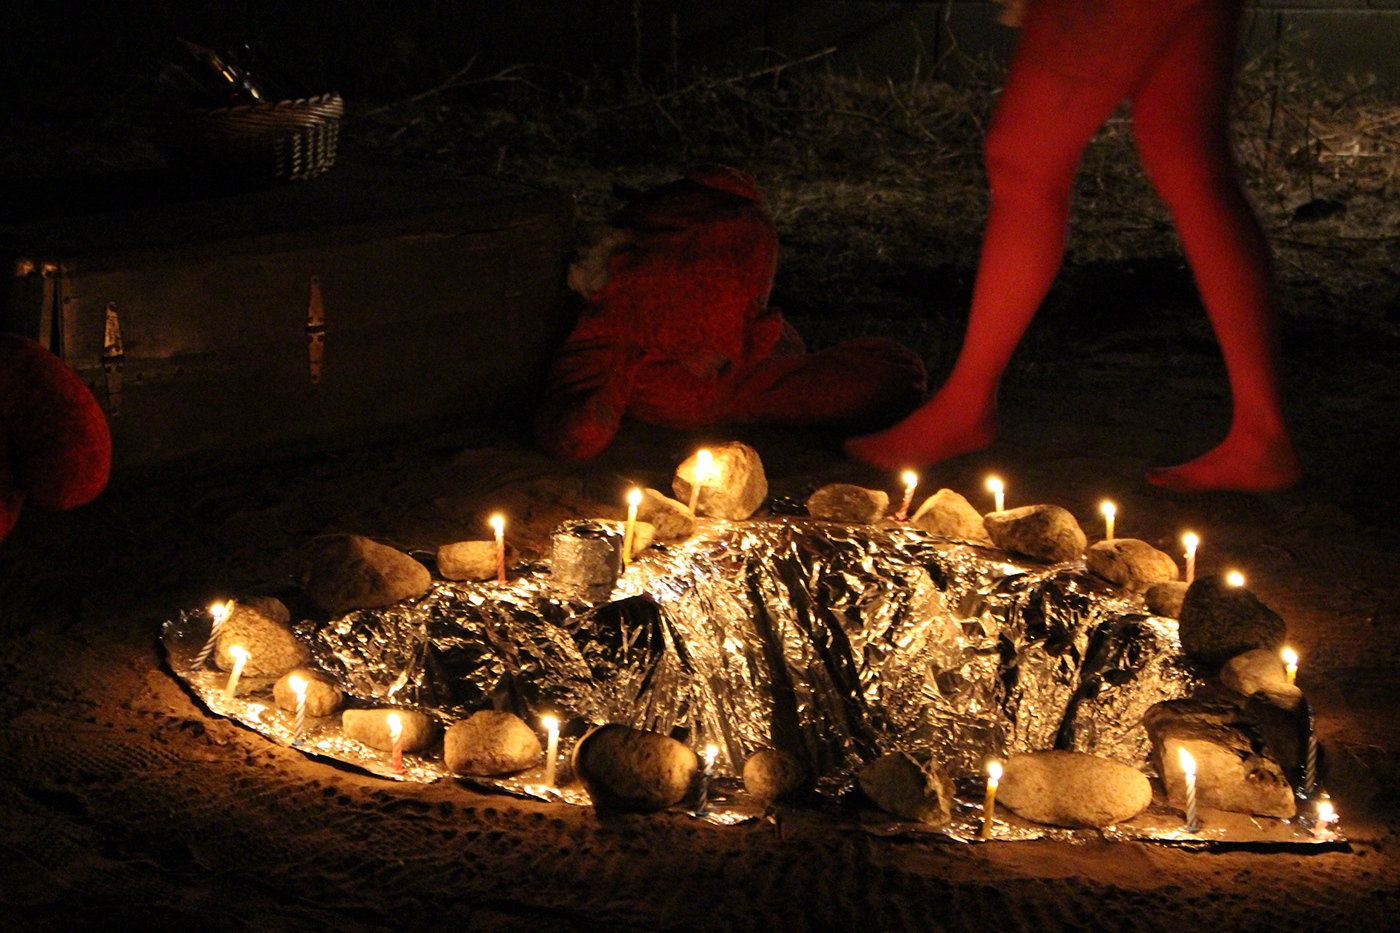 cathartic ritual fire Love death Cremation Phoenix cabbage Performance art